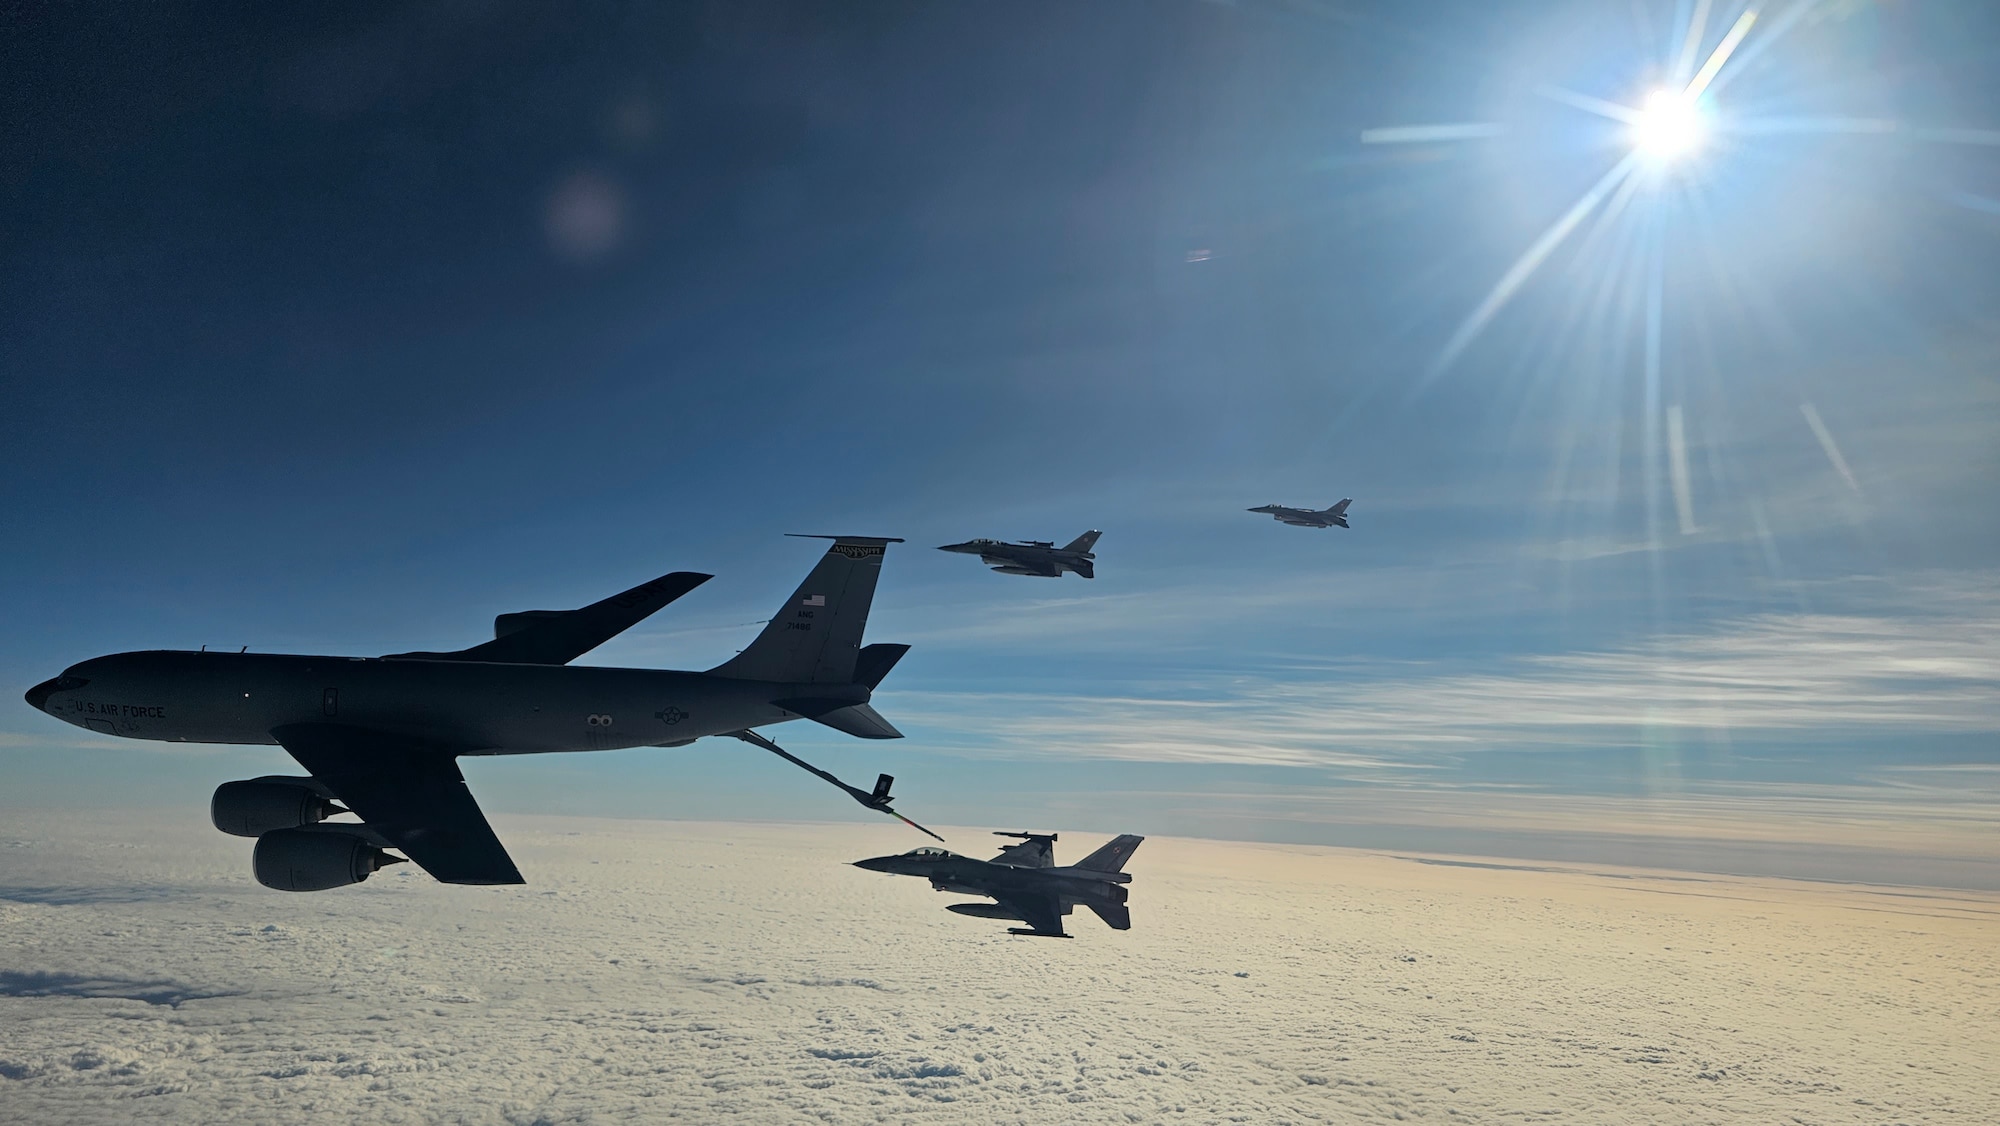 A U.S. KC-135 Stratotanker from the 186th Air Refueling Wing, part of the Mississippi Air National Guard, refuels Polish F-16s from Powidz Air Base, Poland